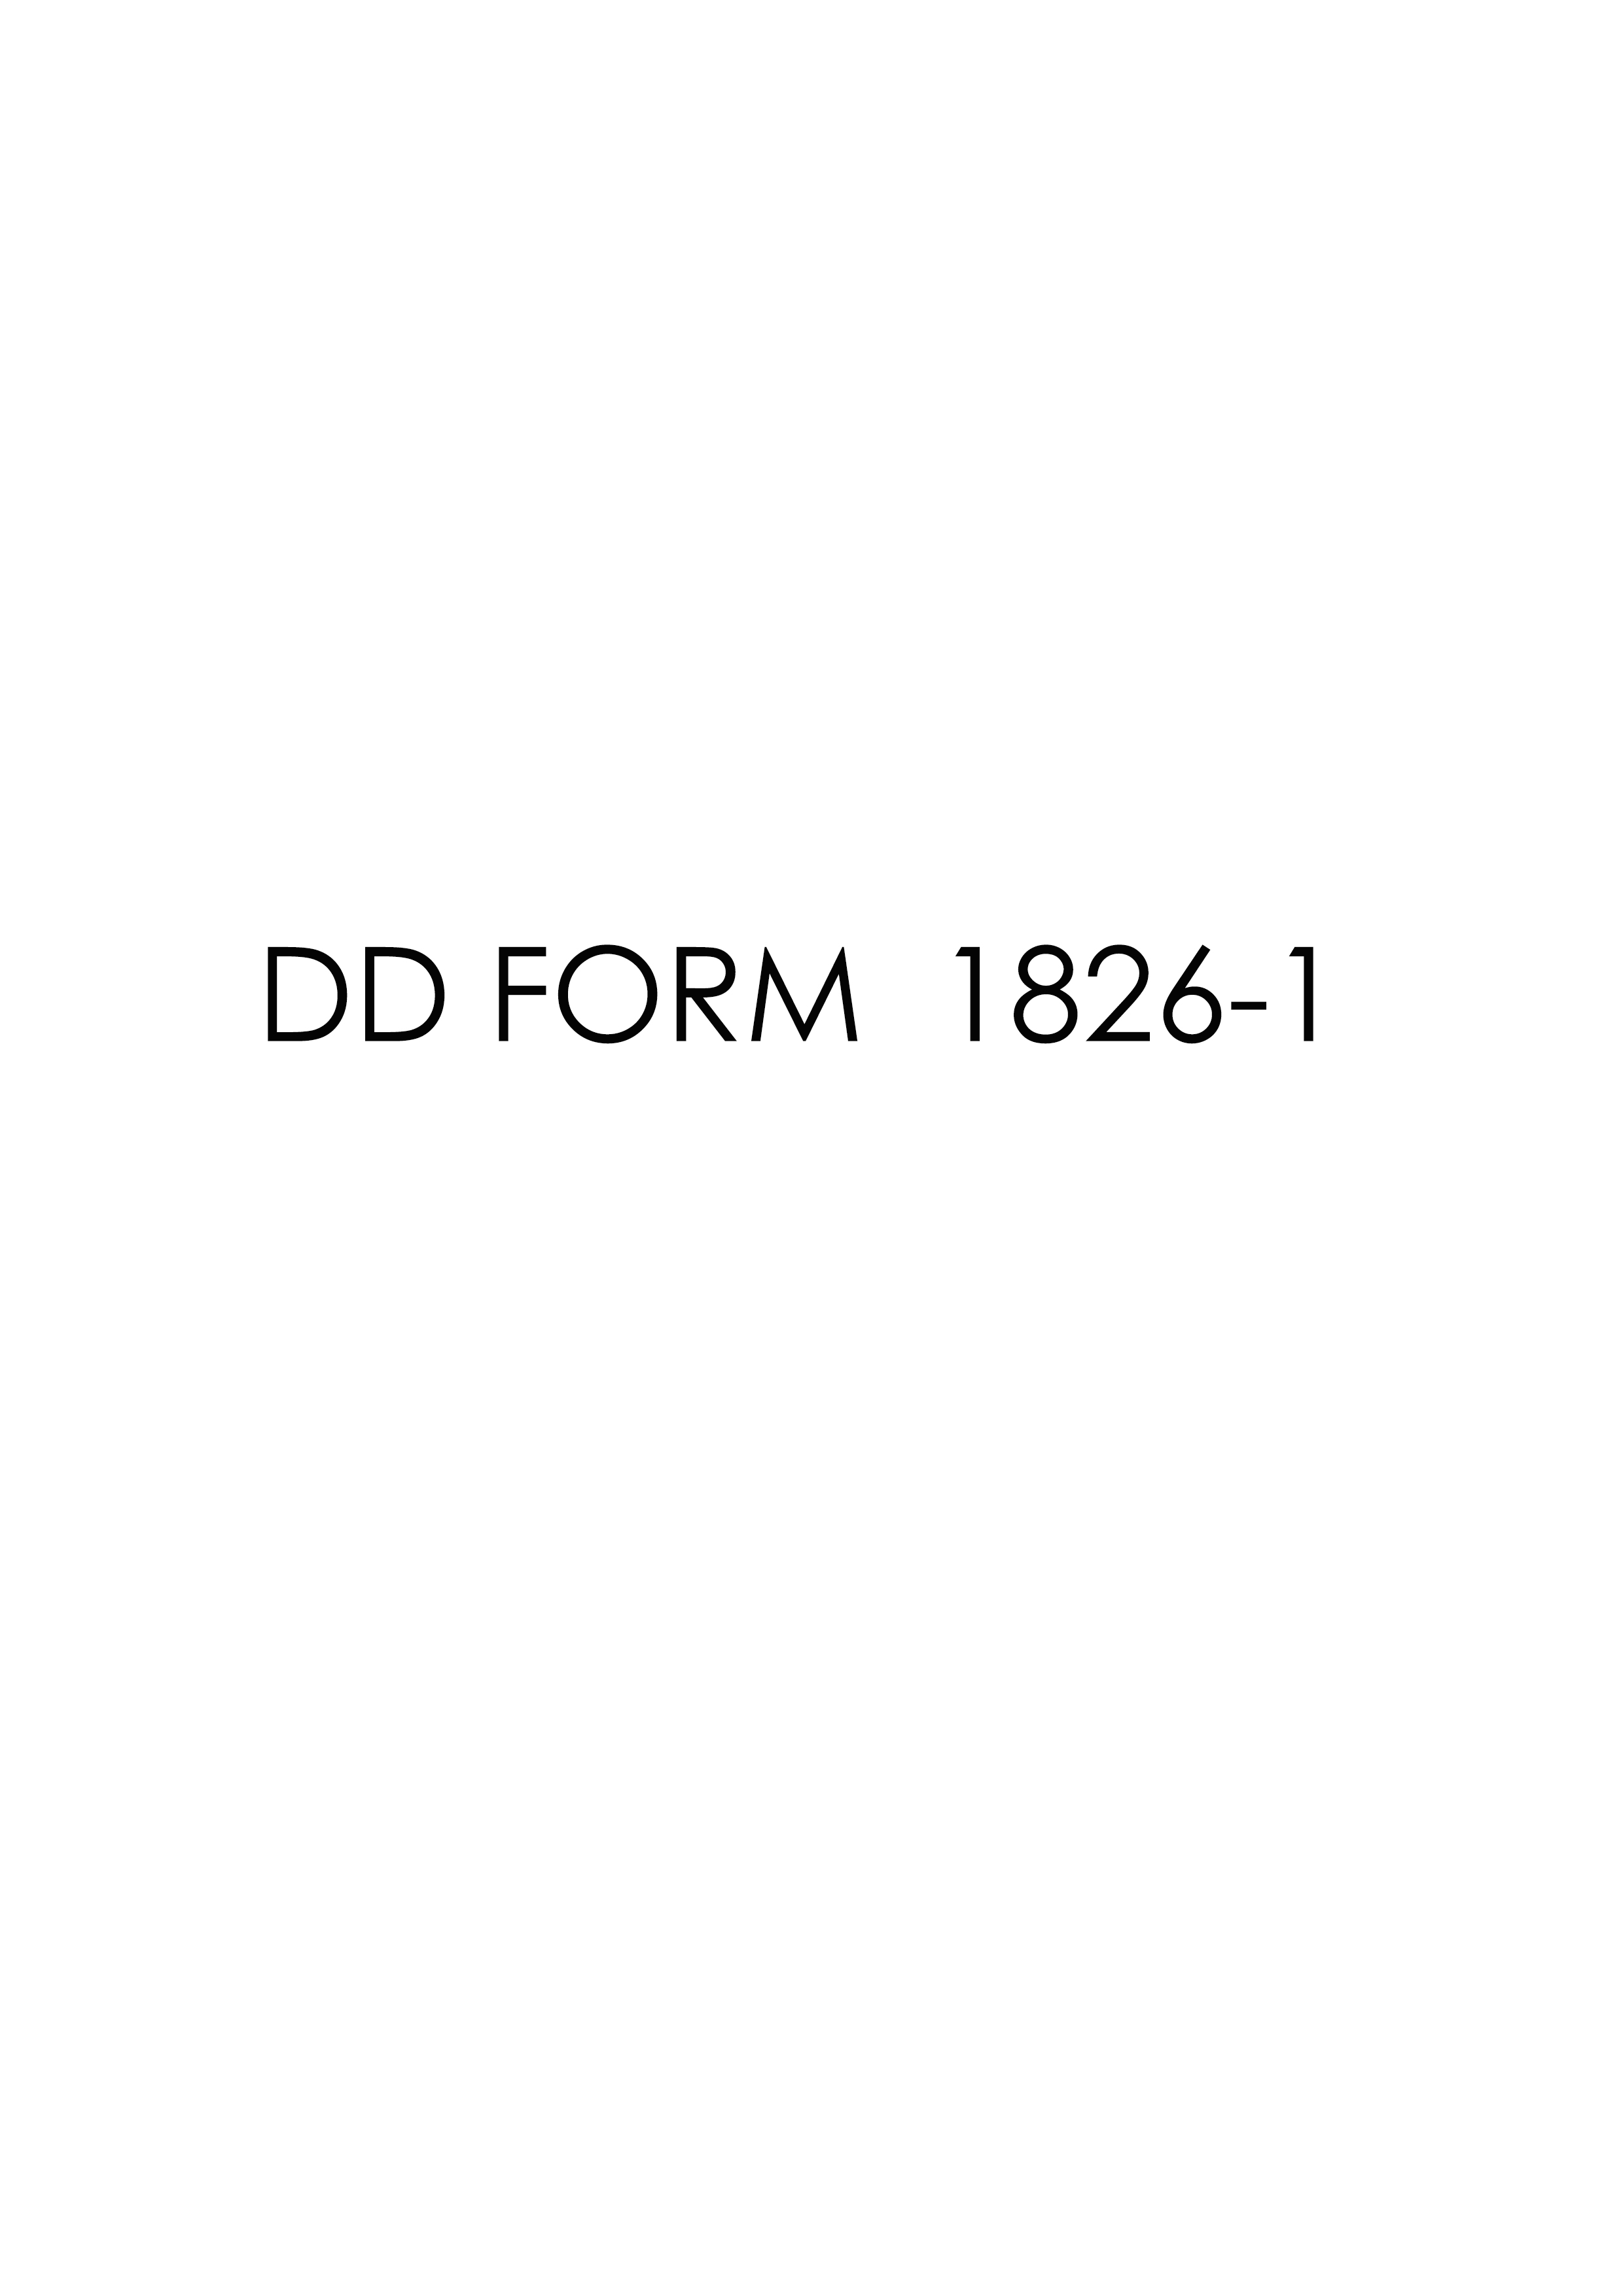 Download dd 1826-1 Fillable Form.